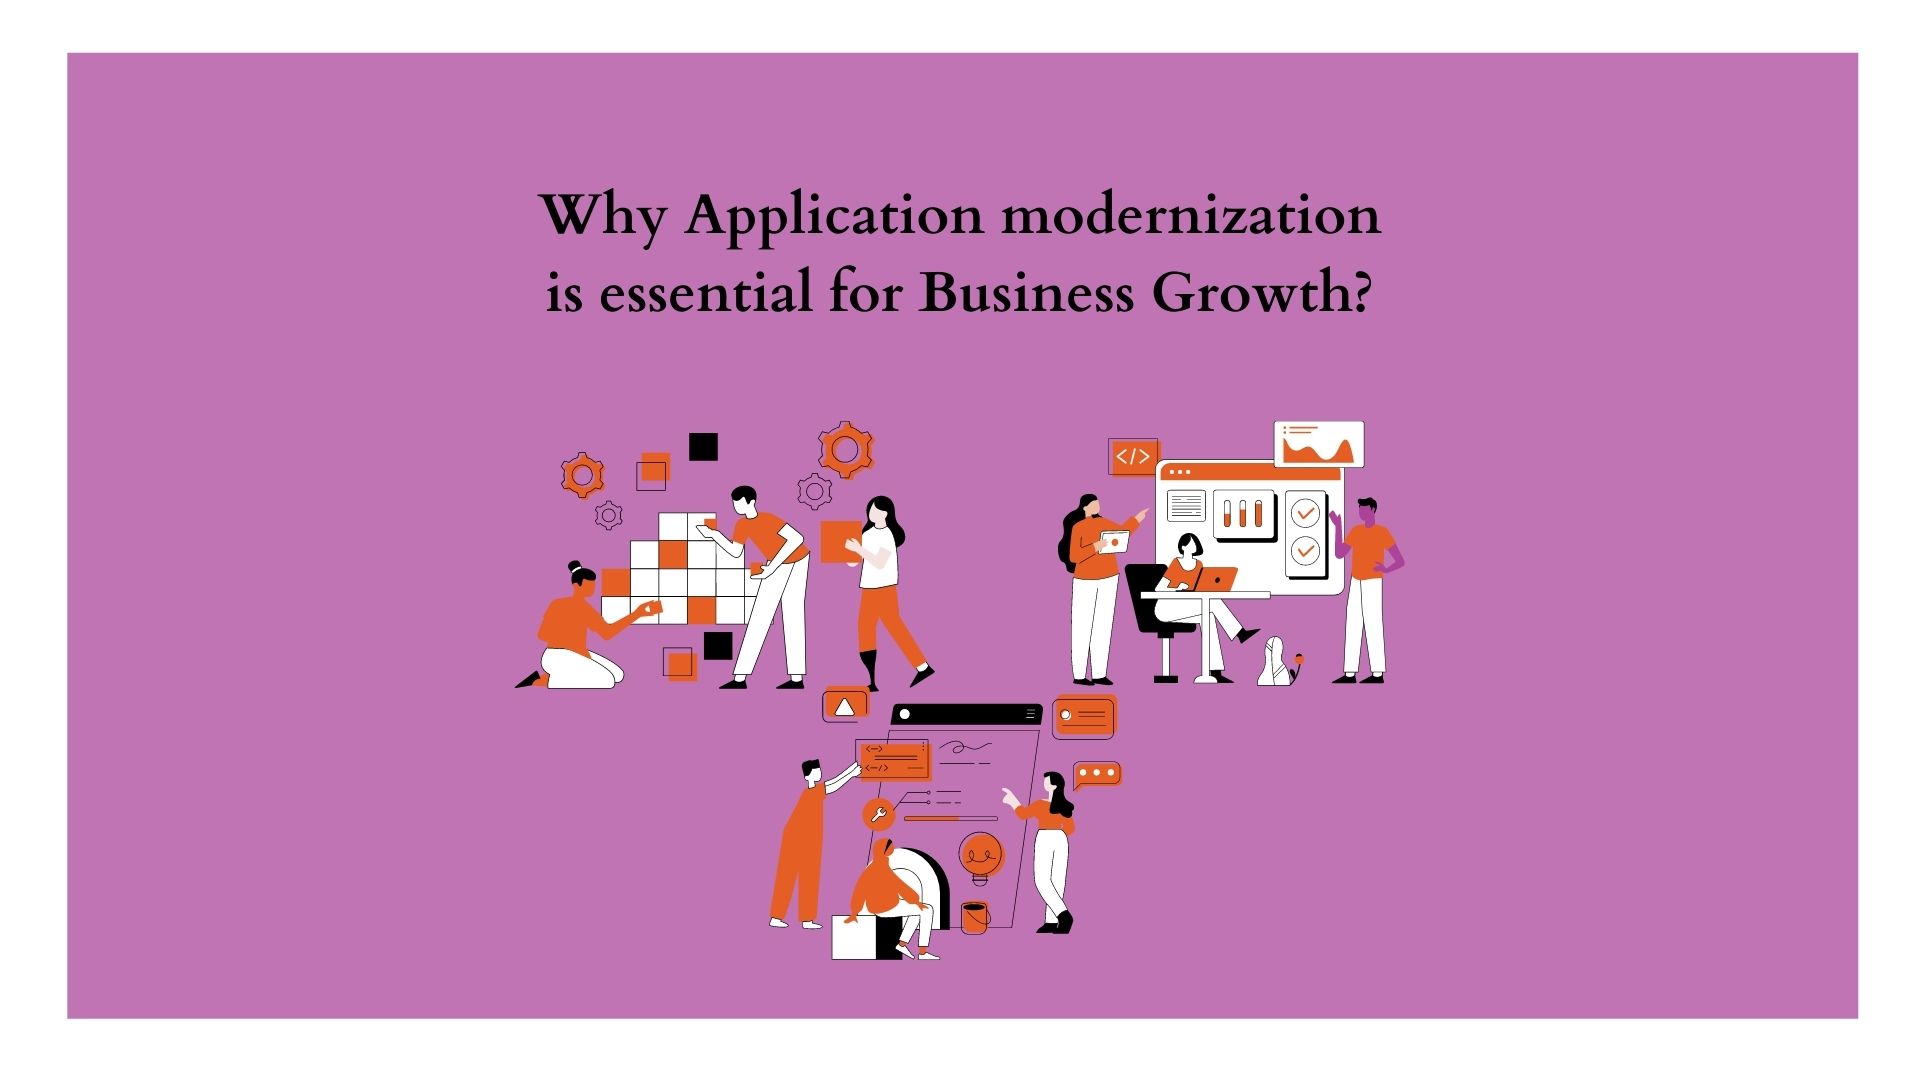 7 Reasons Why Application modernization is essential for Business Growth